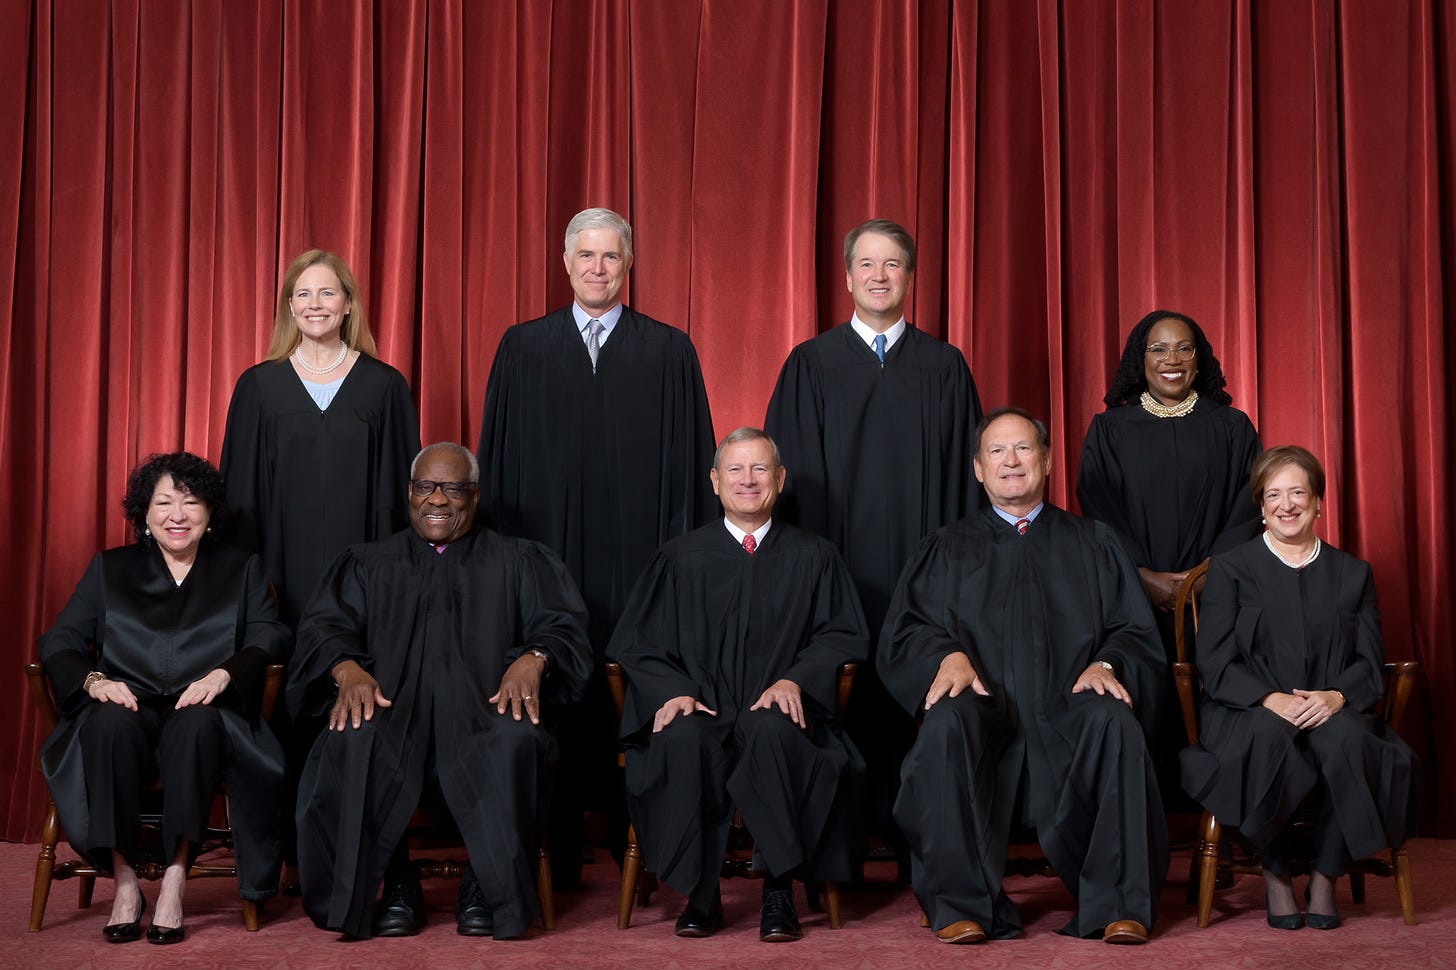 The Supreme Court: Current Justices | Supreme Court ...